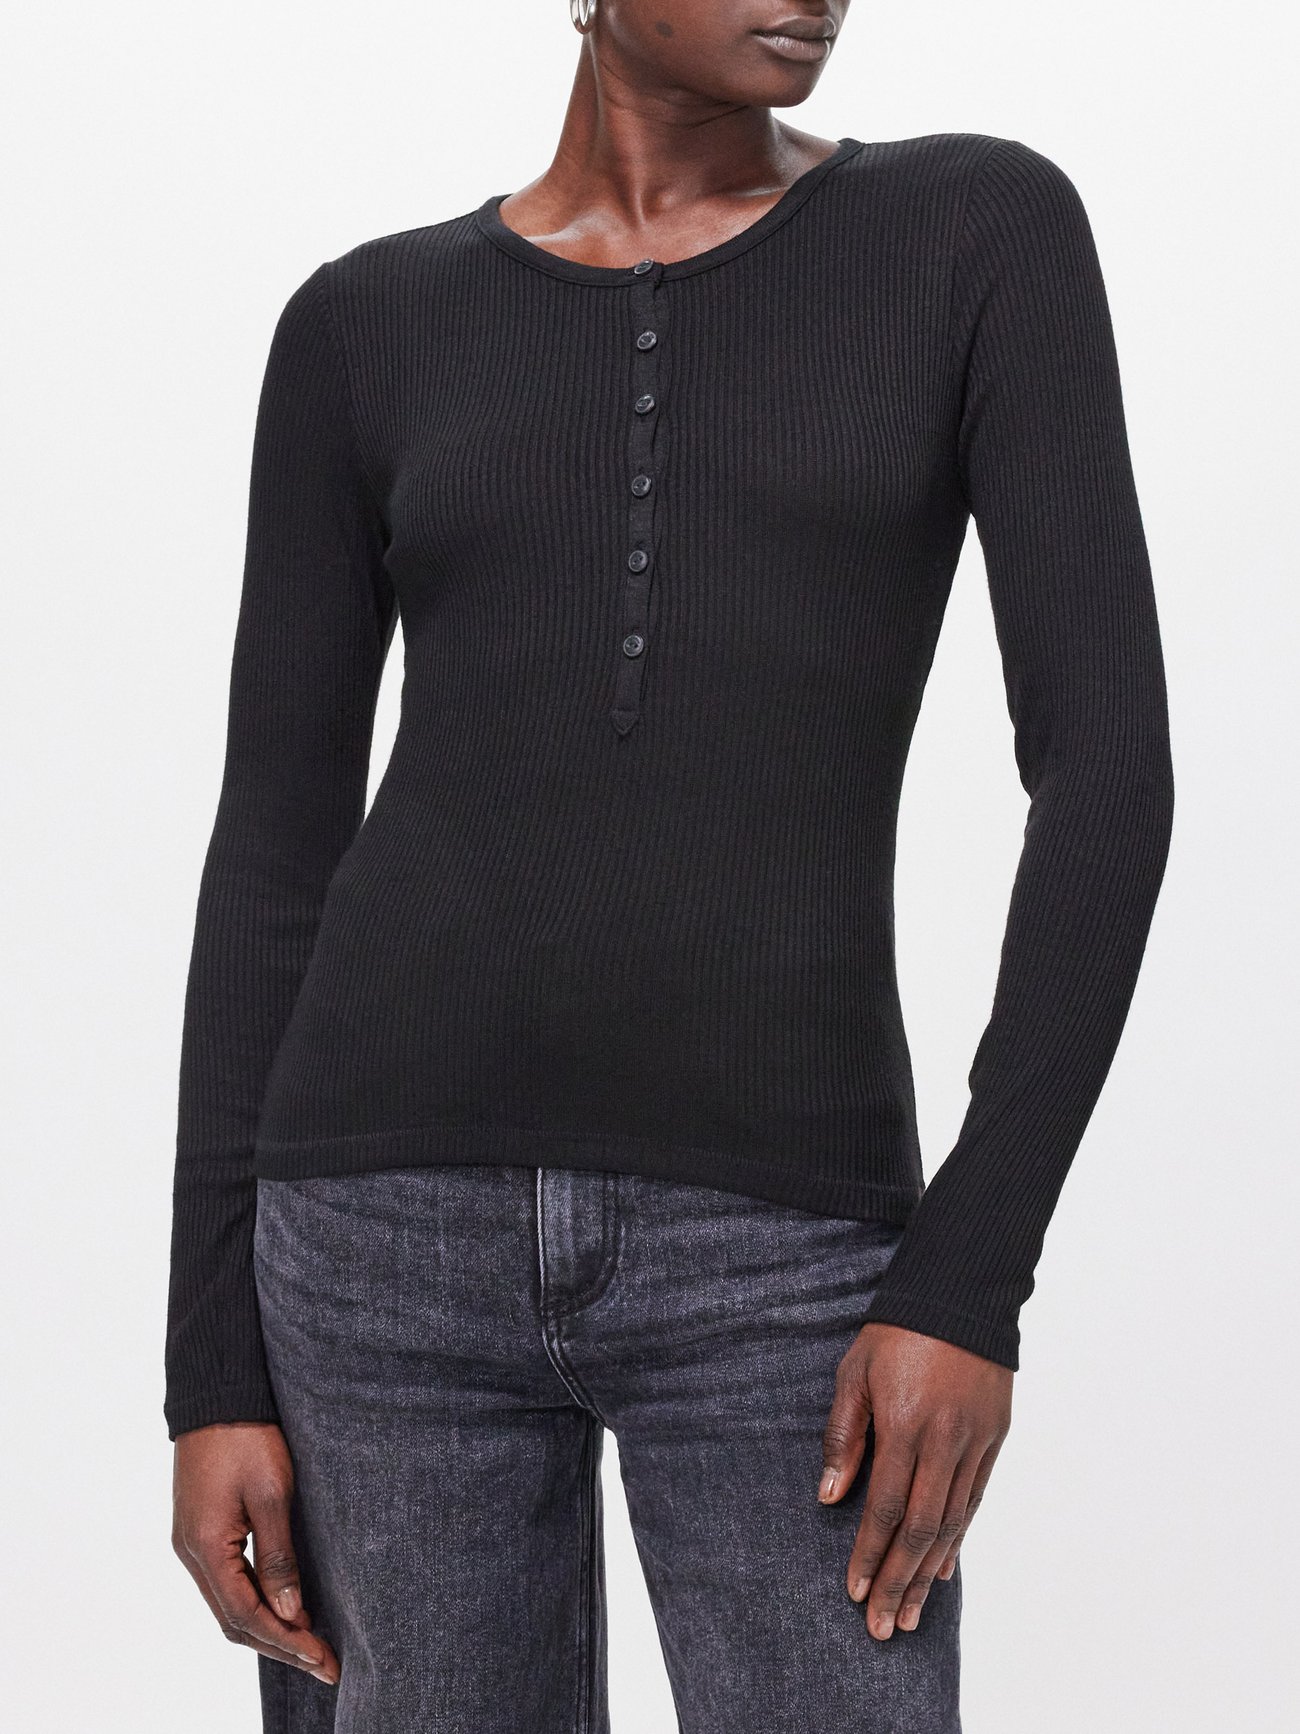 The Knit ribbed Henley top